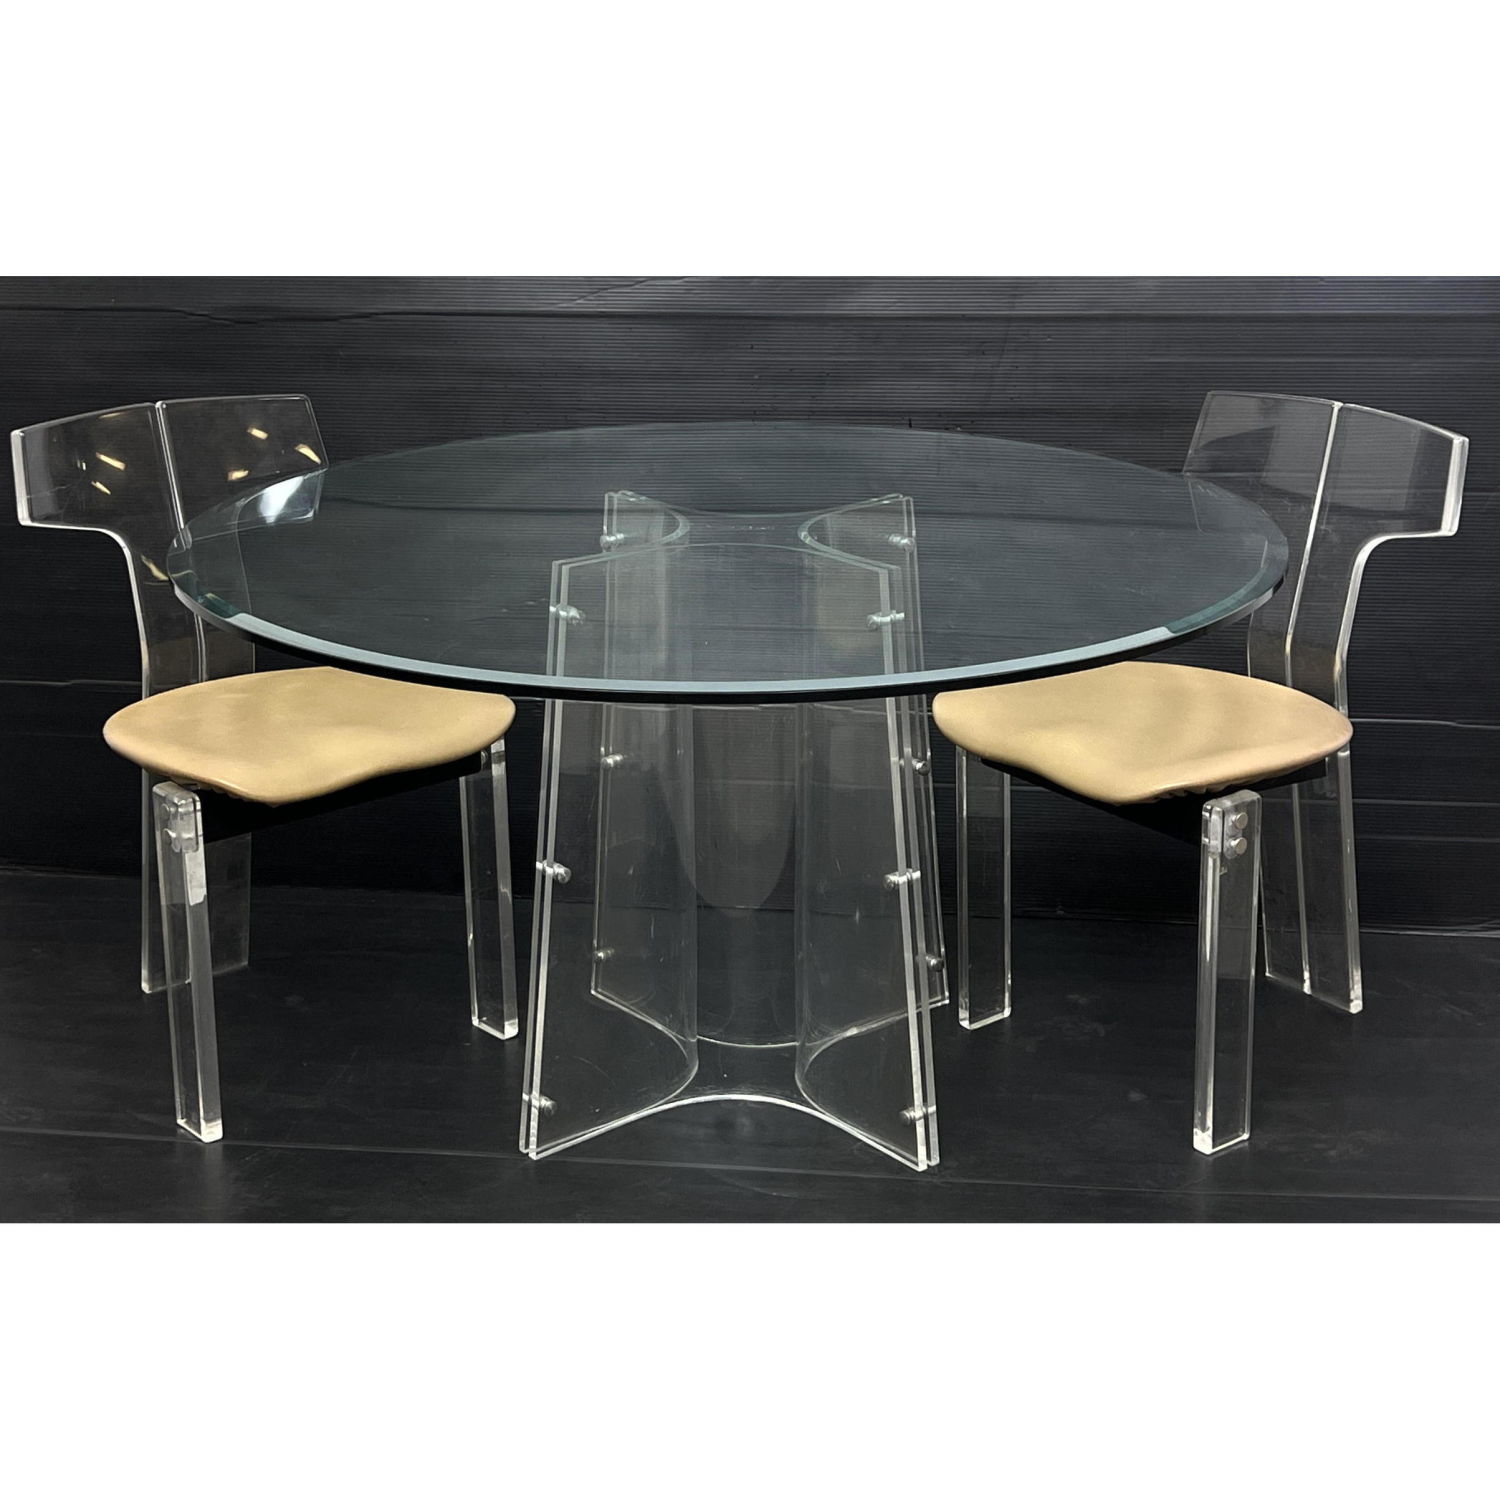 3pc Lucite and Glass Cafe Table 2b902c